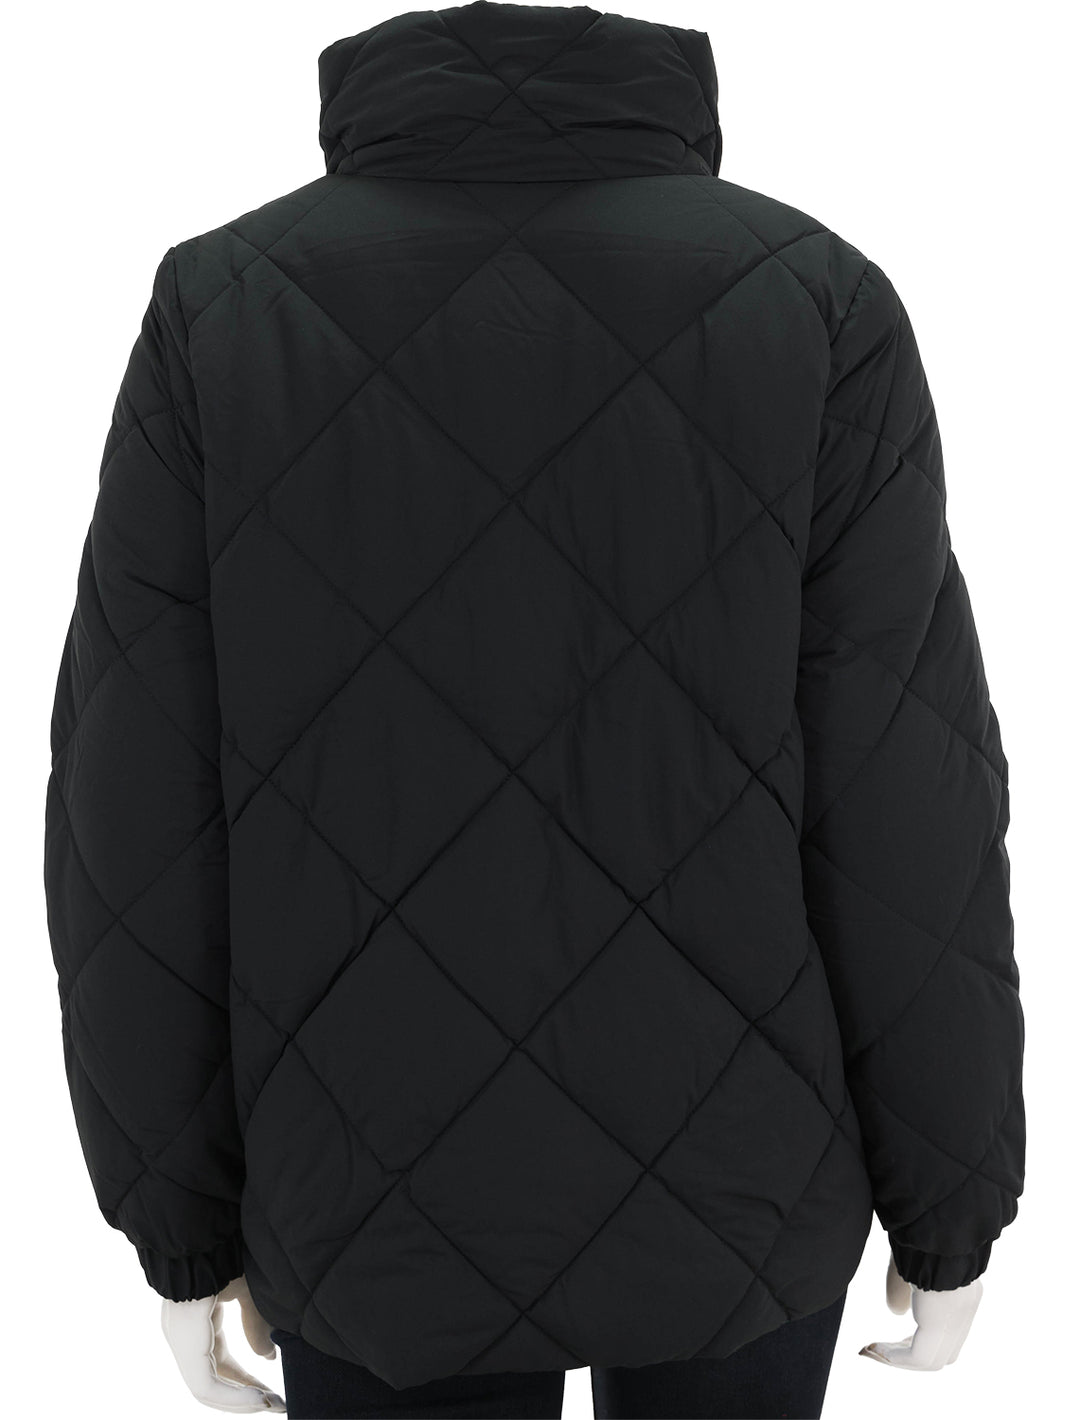 Back view of Barbour's reversible hudswell quilt jacket in black.